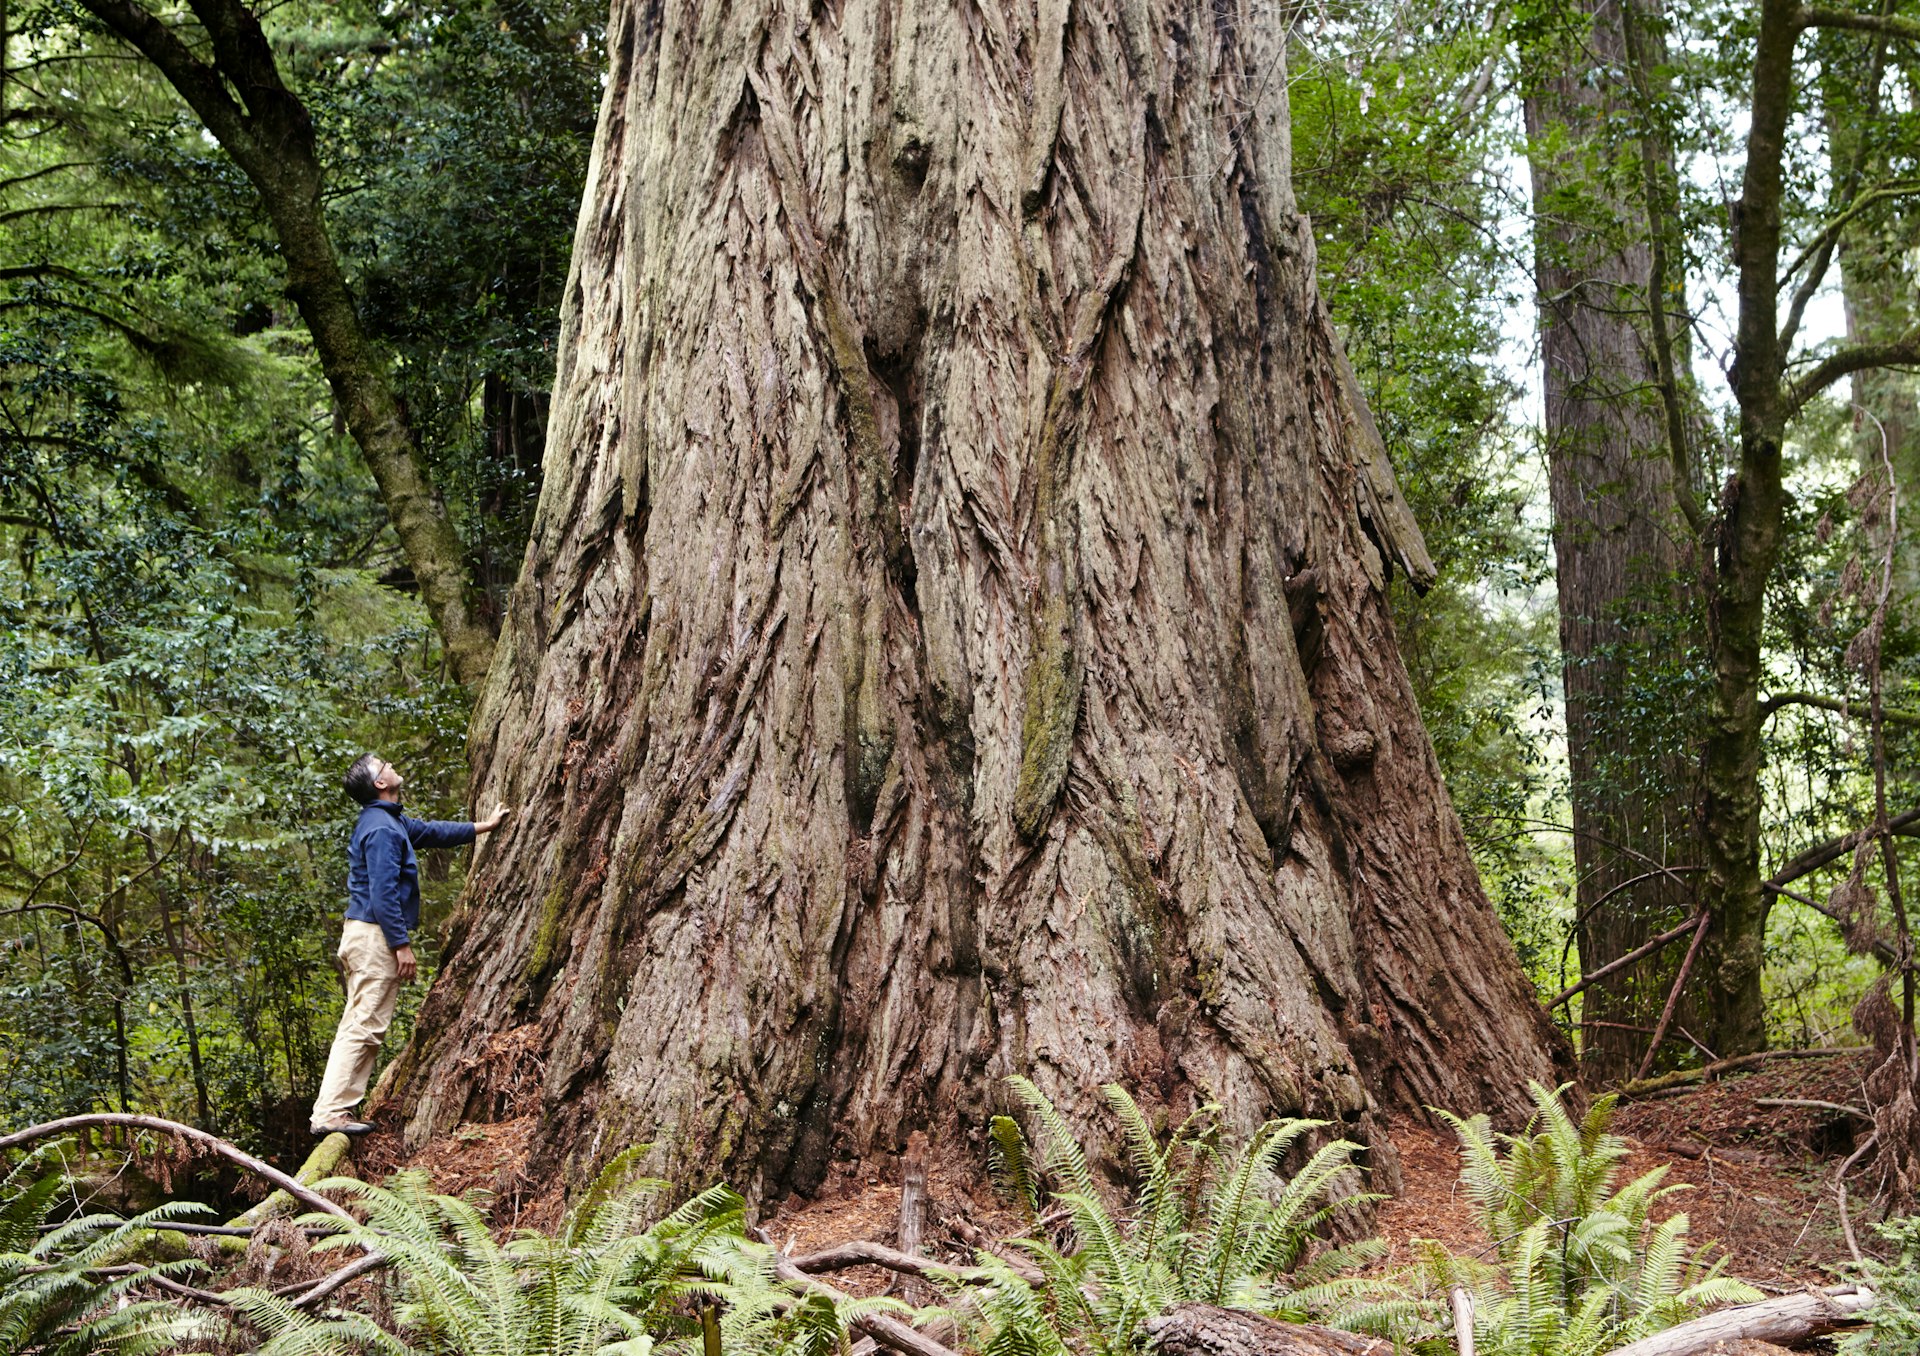 A giant redwood in Prairie Creek Redwoods State Park